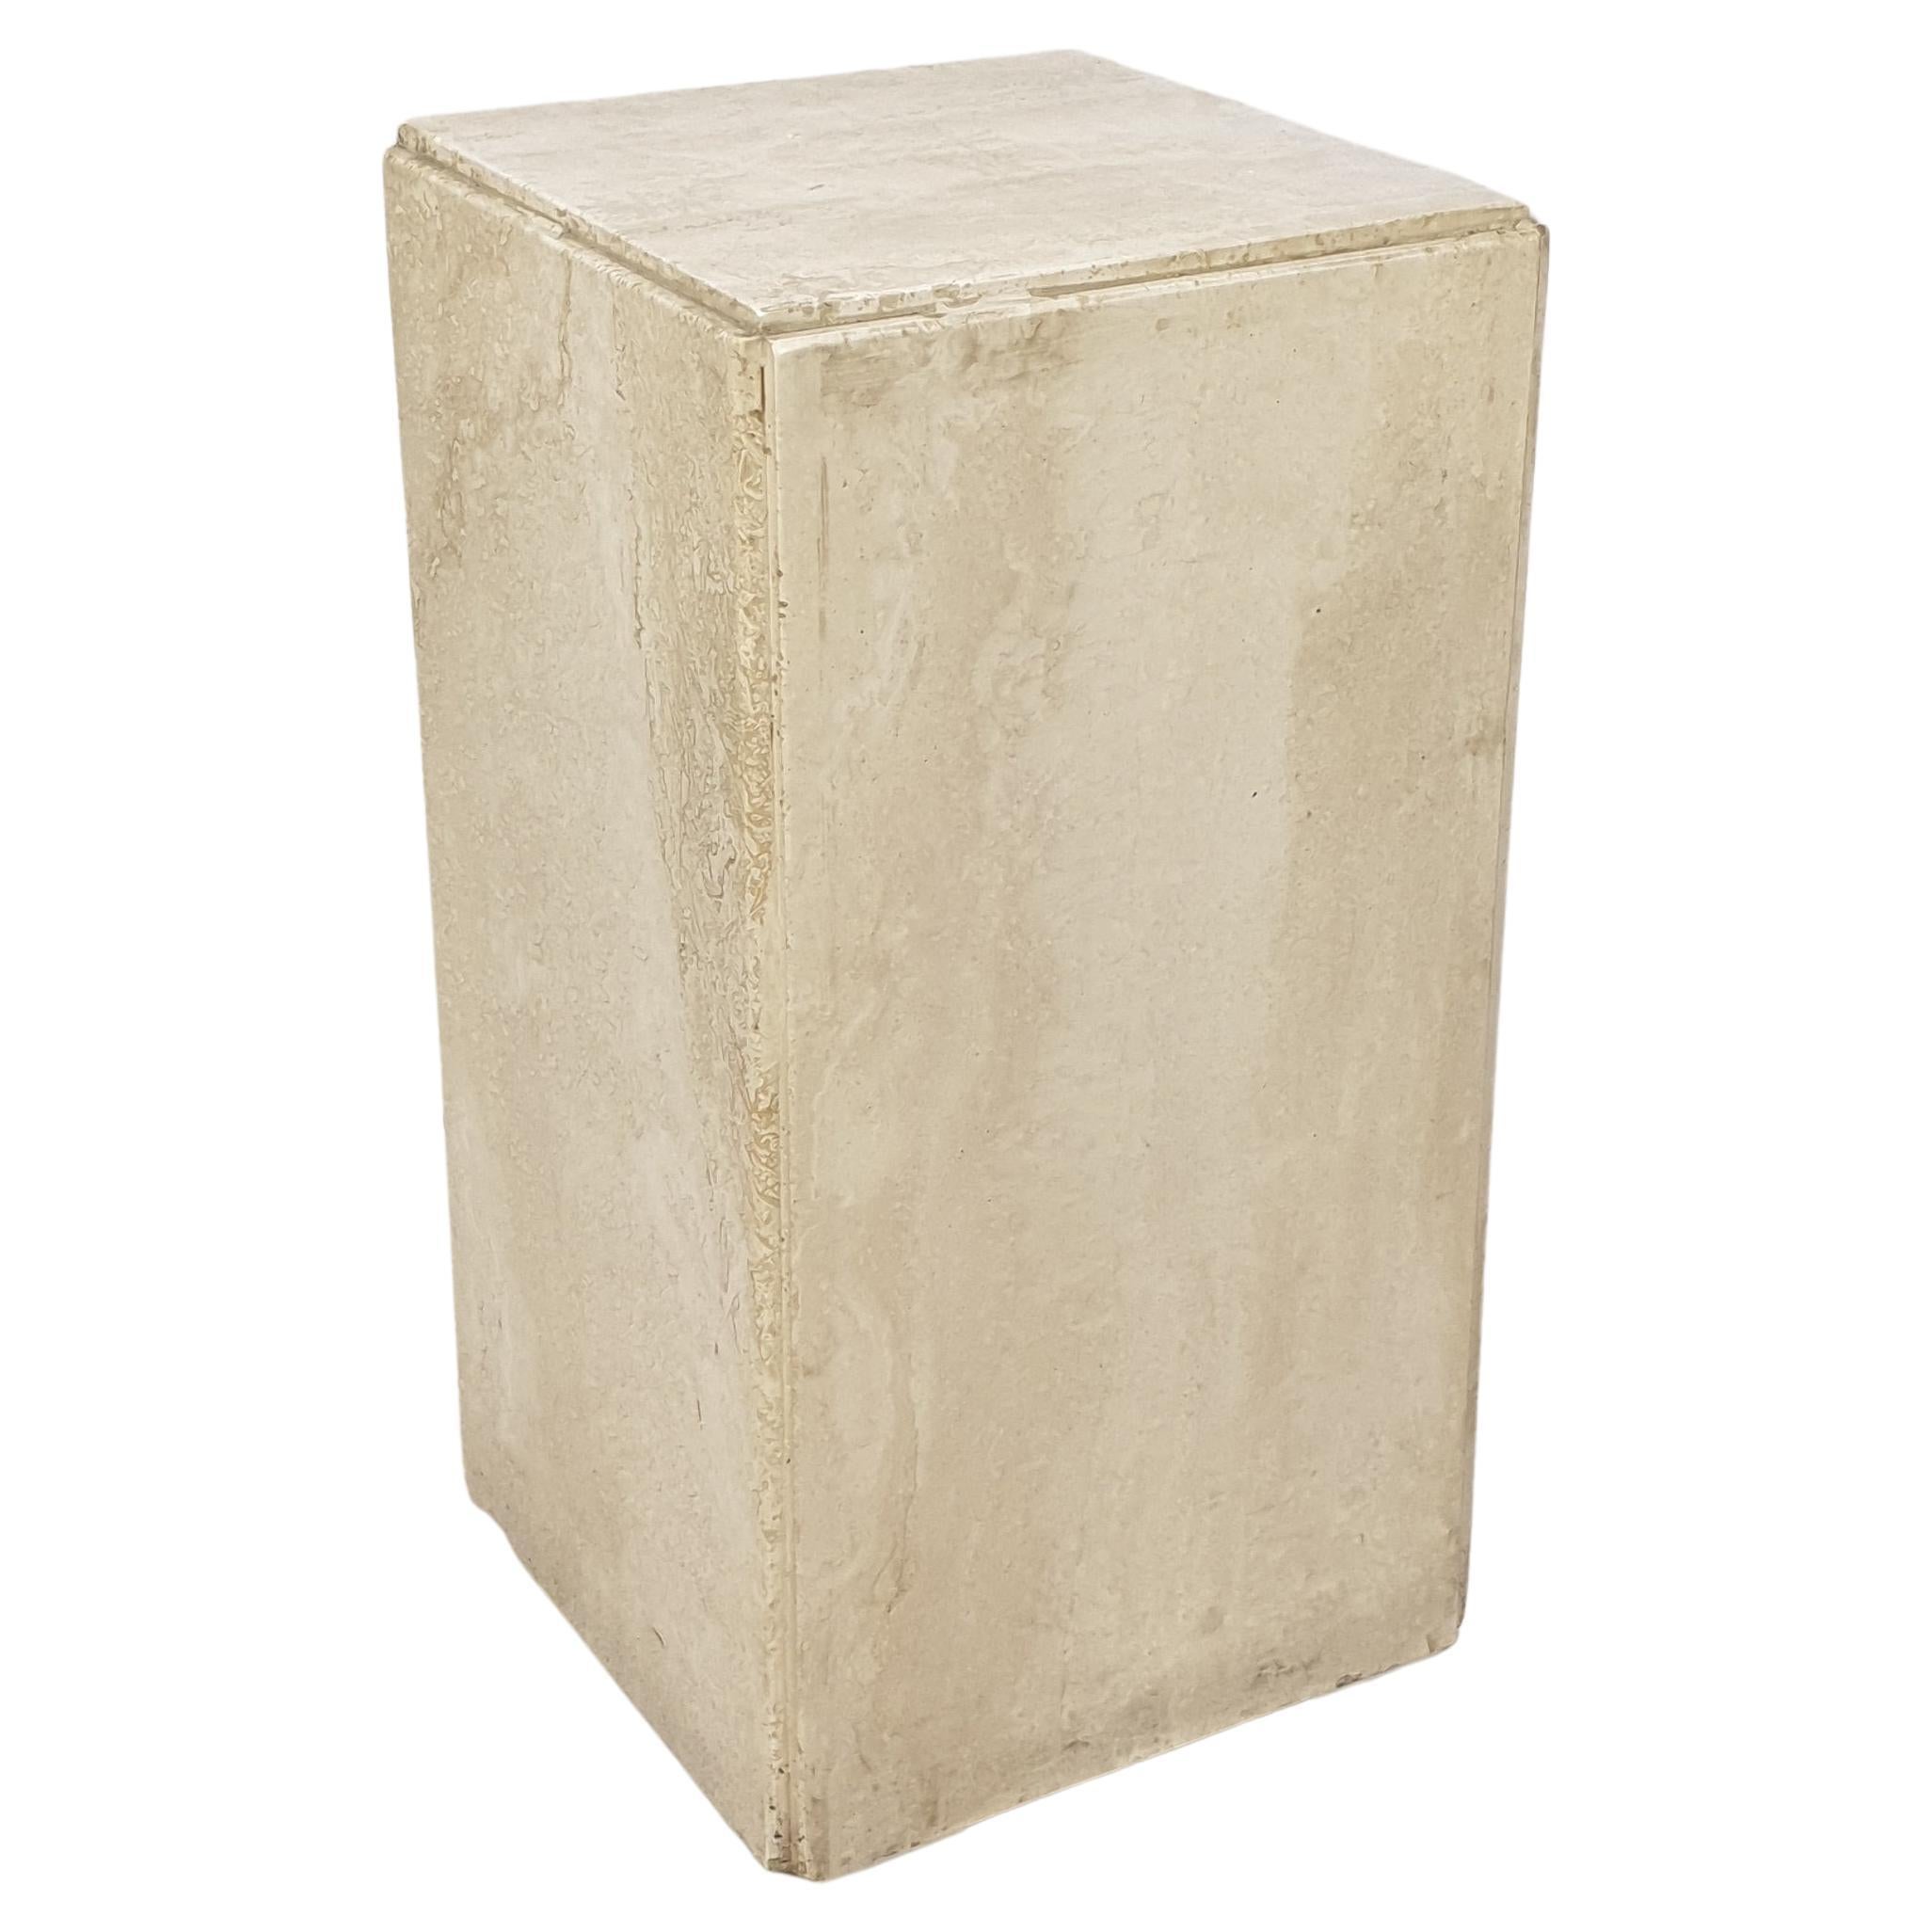 Italian Travertine Side Table or Pedestal, 1980's For Sale